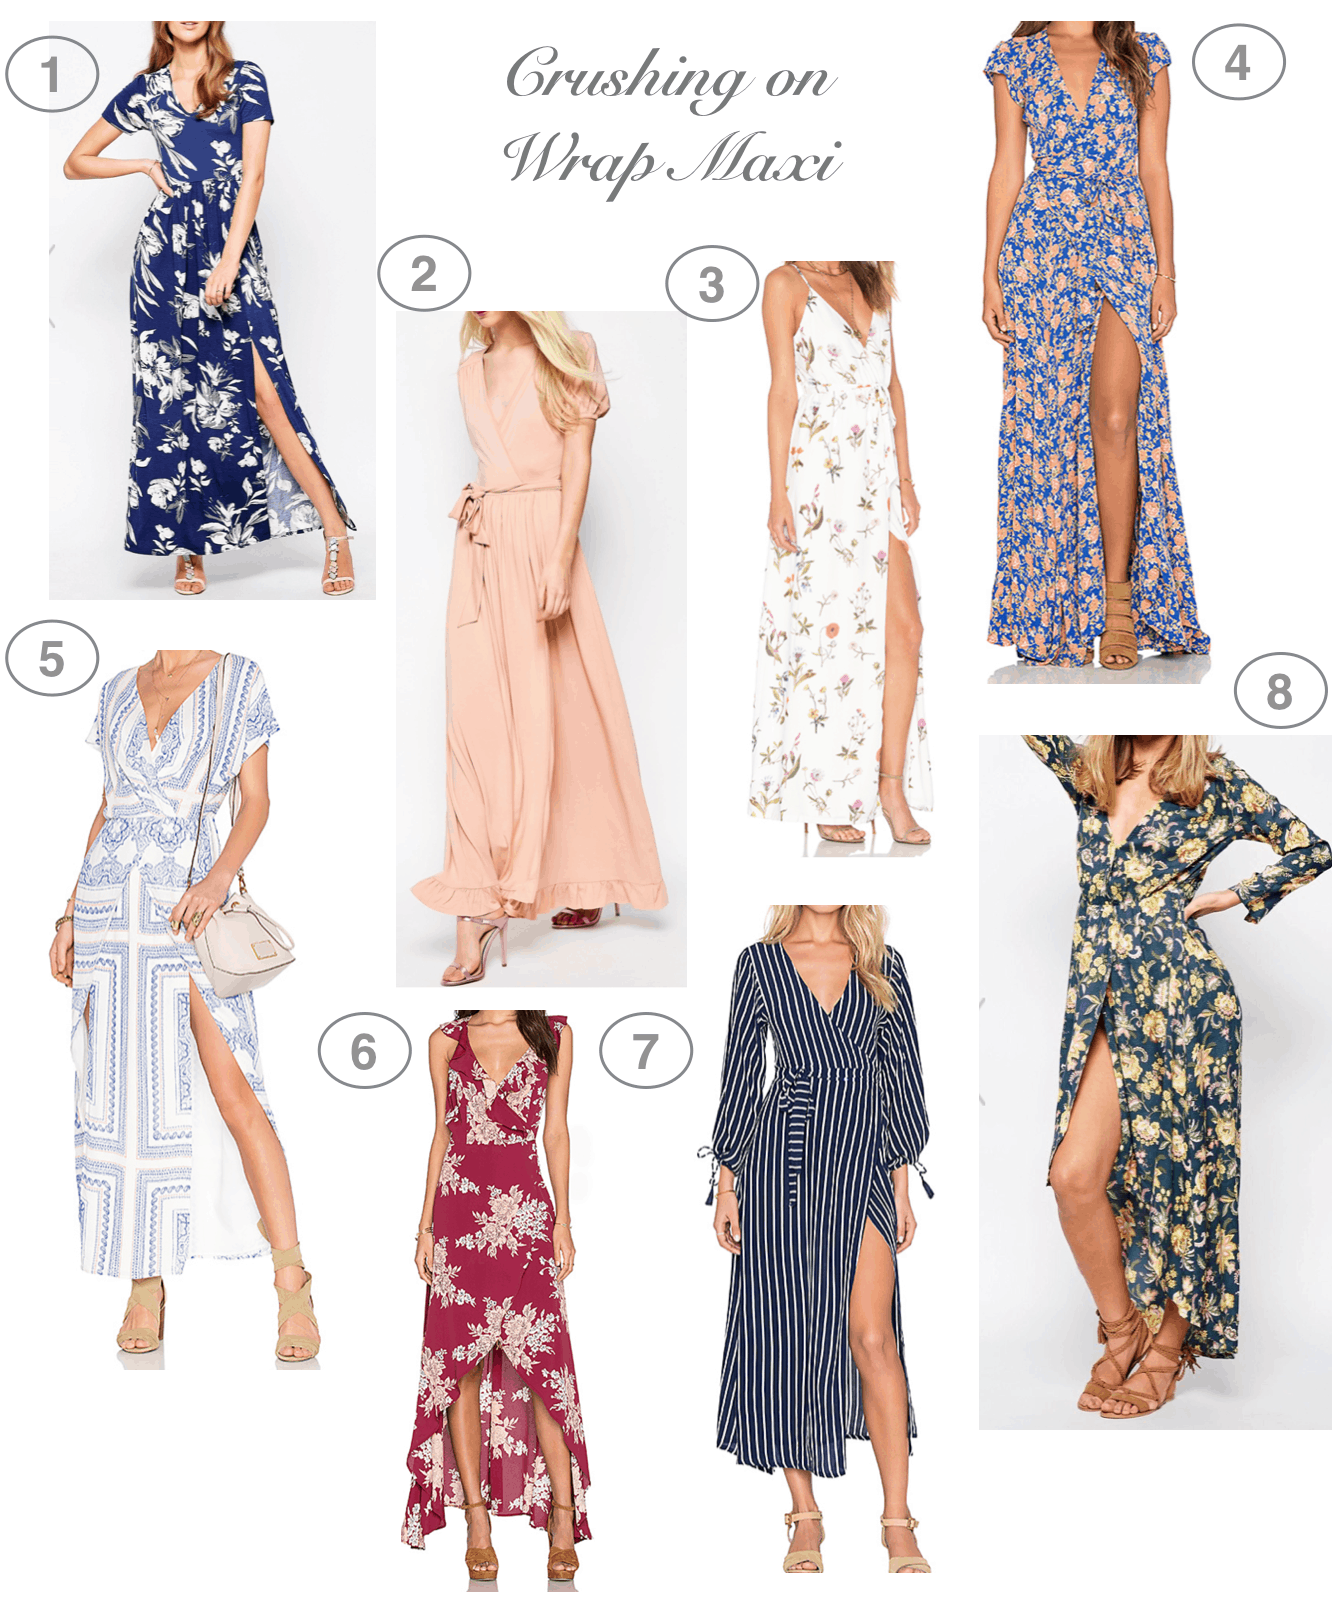 Dress Up Buttercup // A Houston-based fashion and inspiration blog developed to daily inspire your own personal style by Dede Raad | Crushing on Wrap Maxi Dresses